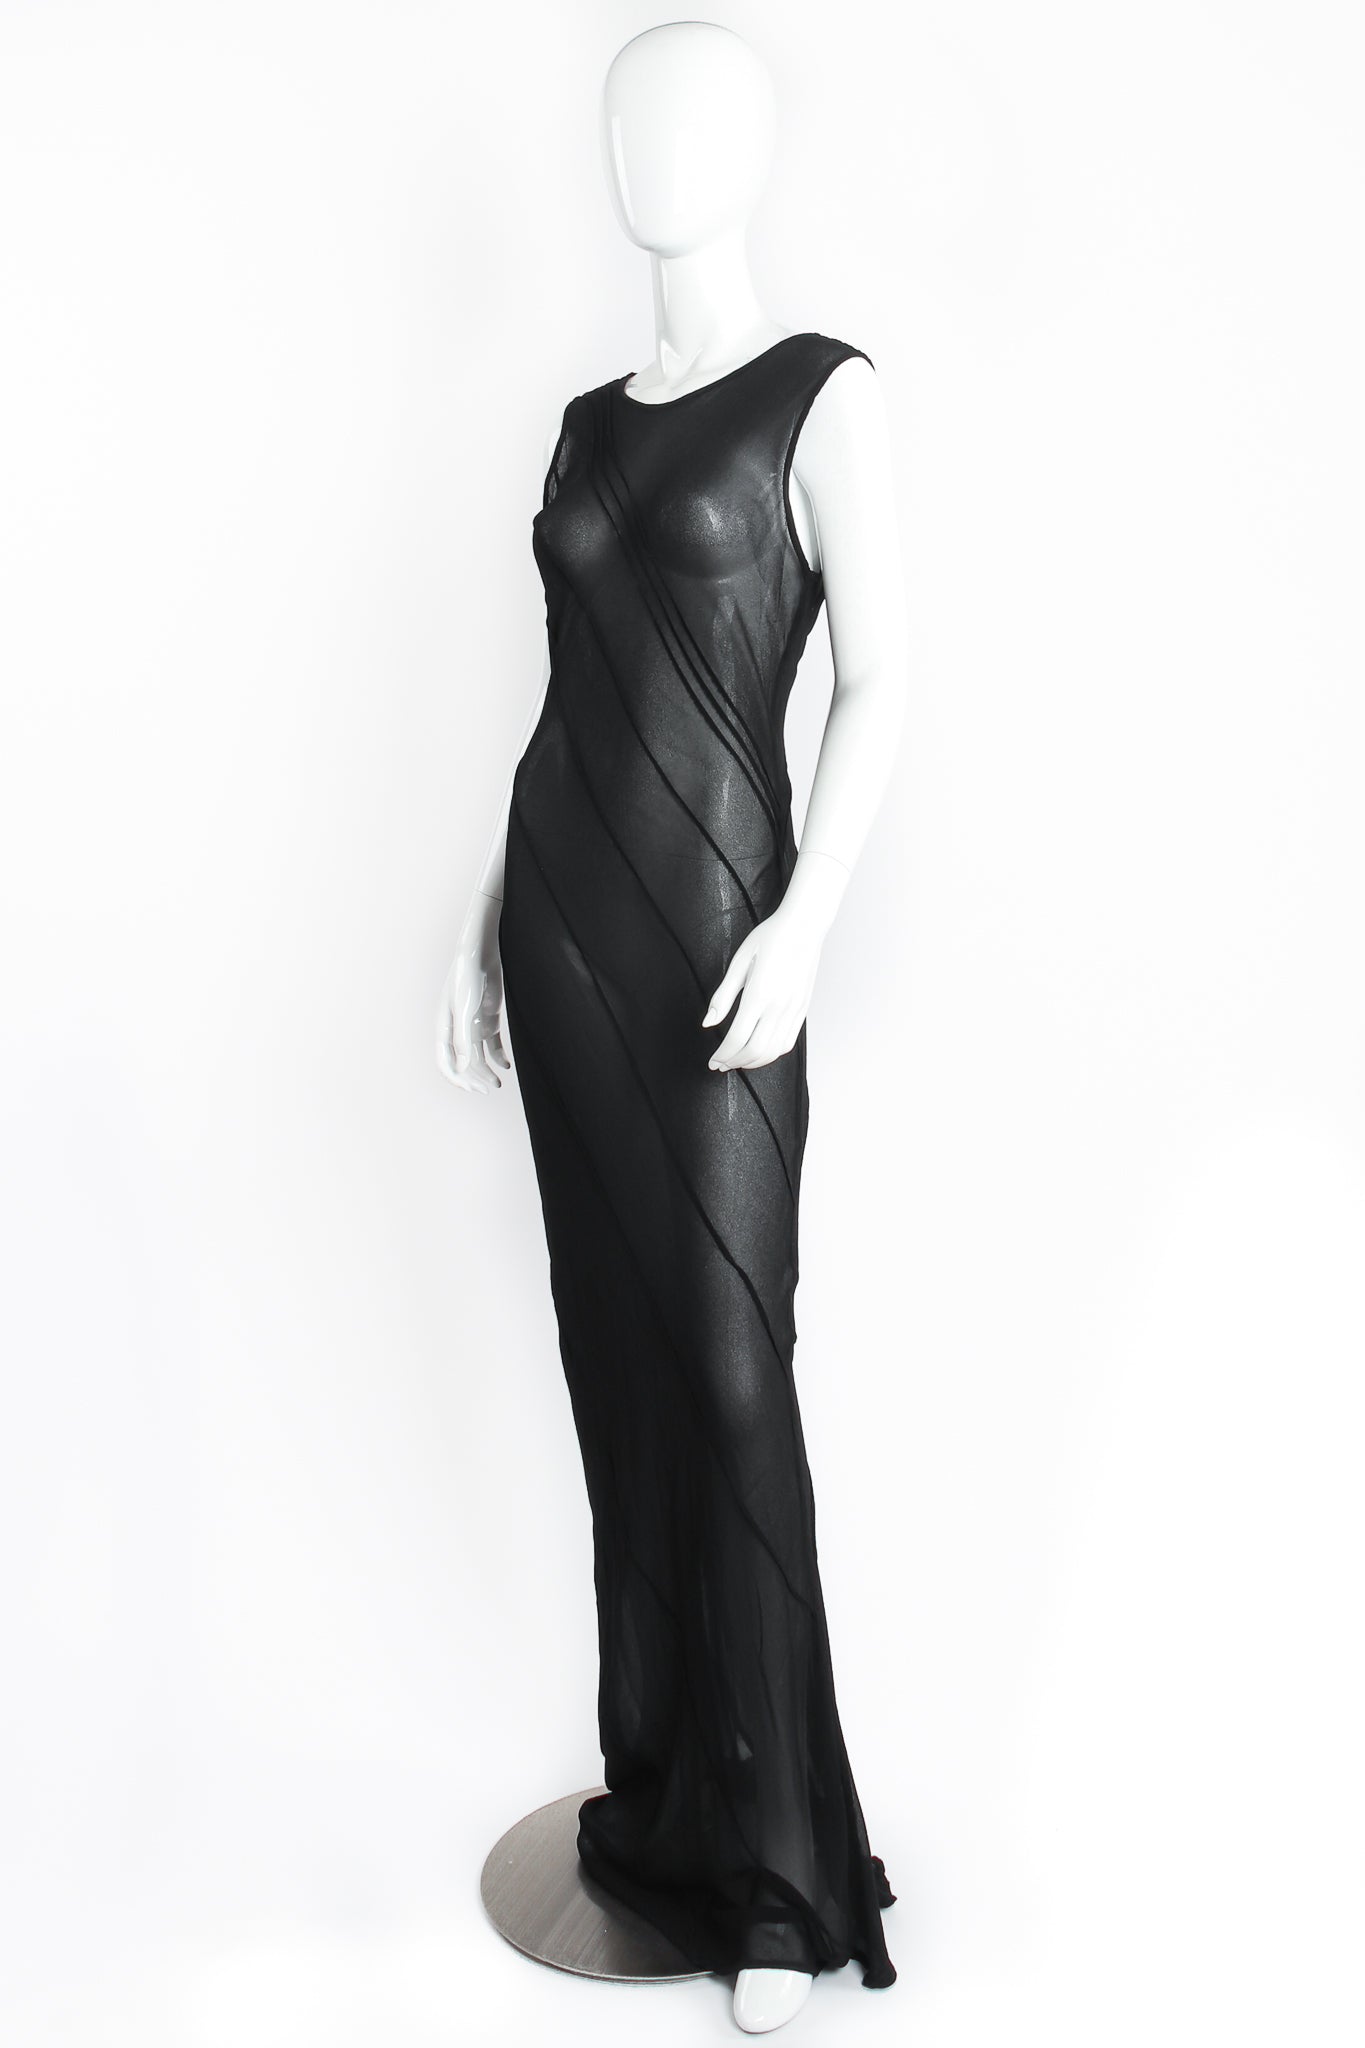 Vintage Ghost Sheer Chiffon Pintuck Sheath Dress on Mannequin front angle at Recess Los Angeles